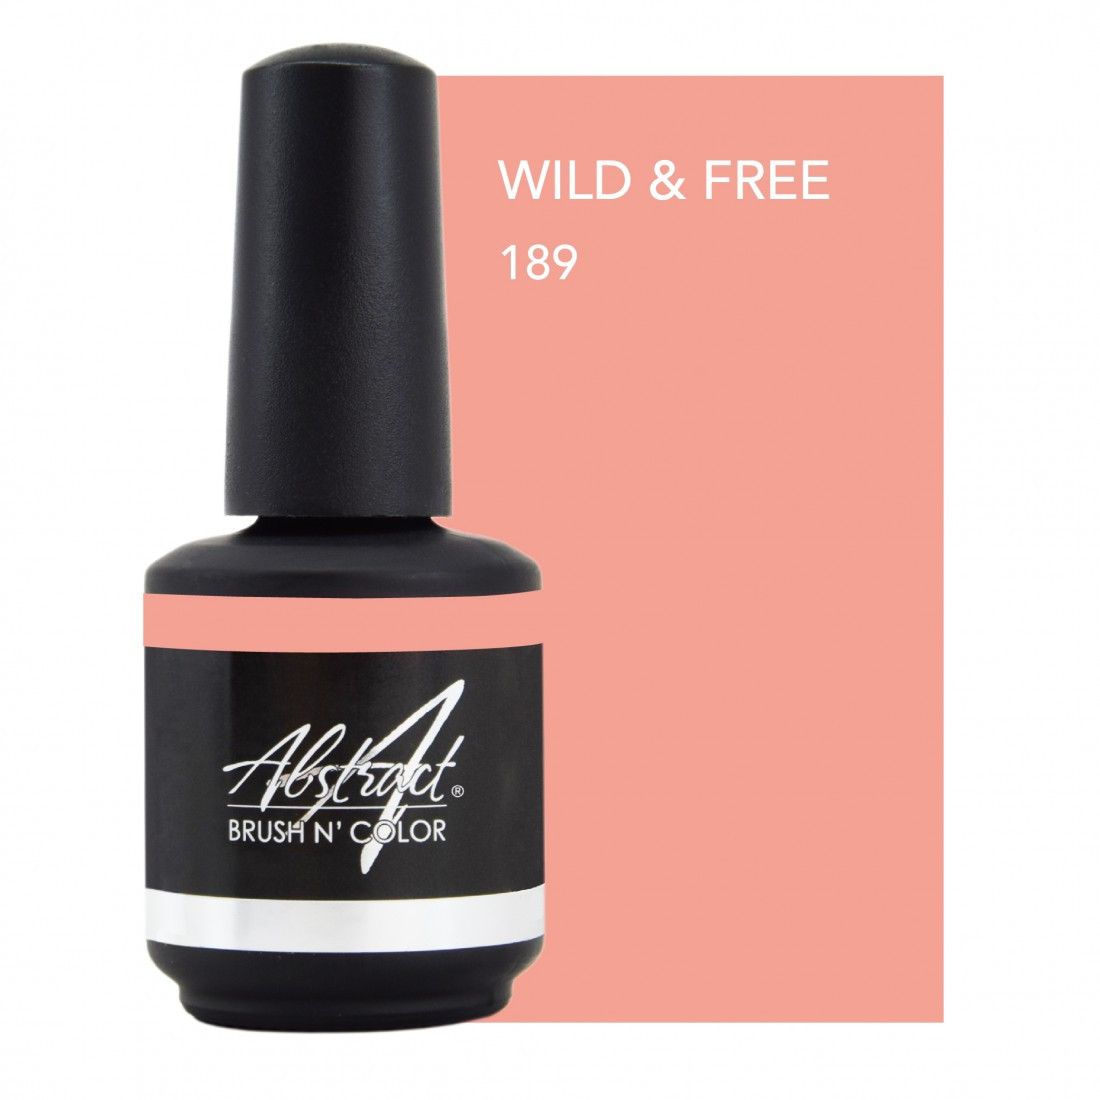 Abstract Wild & free 15 ml